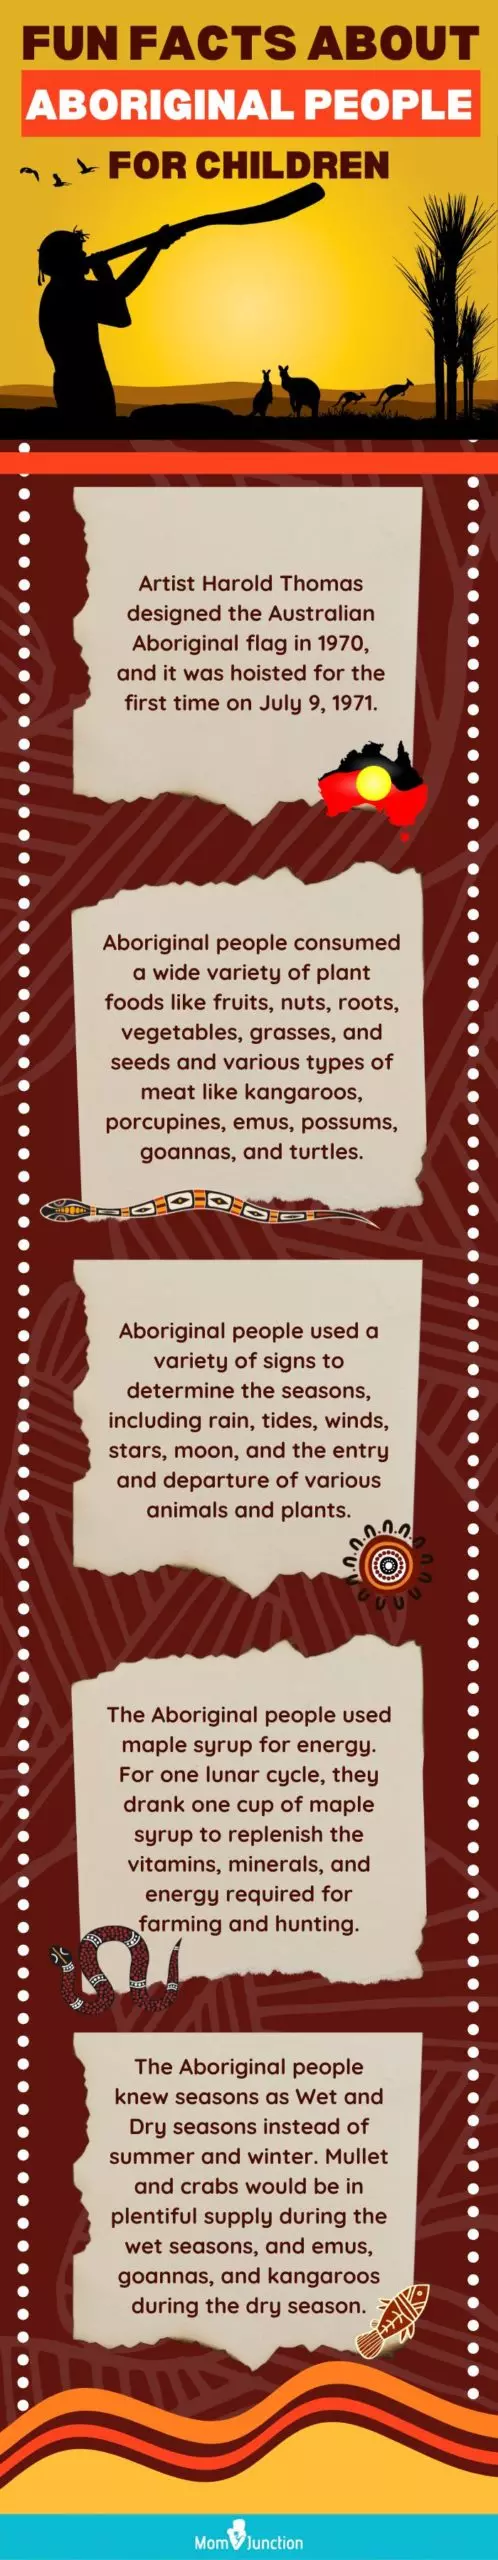 fun facts about aboriginal people for children (infographic)